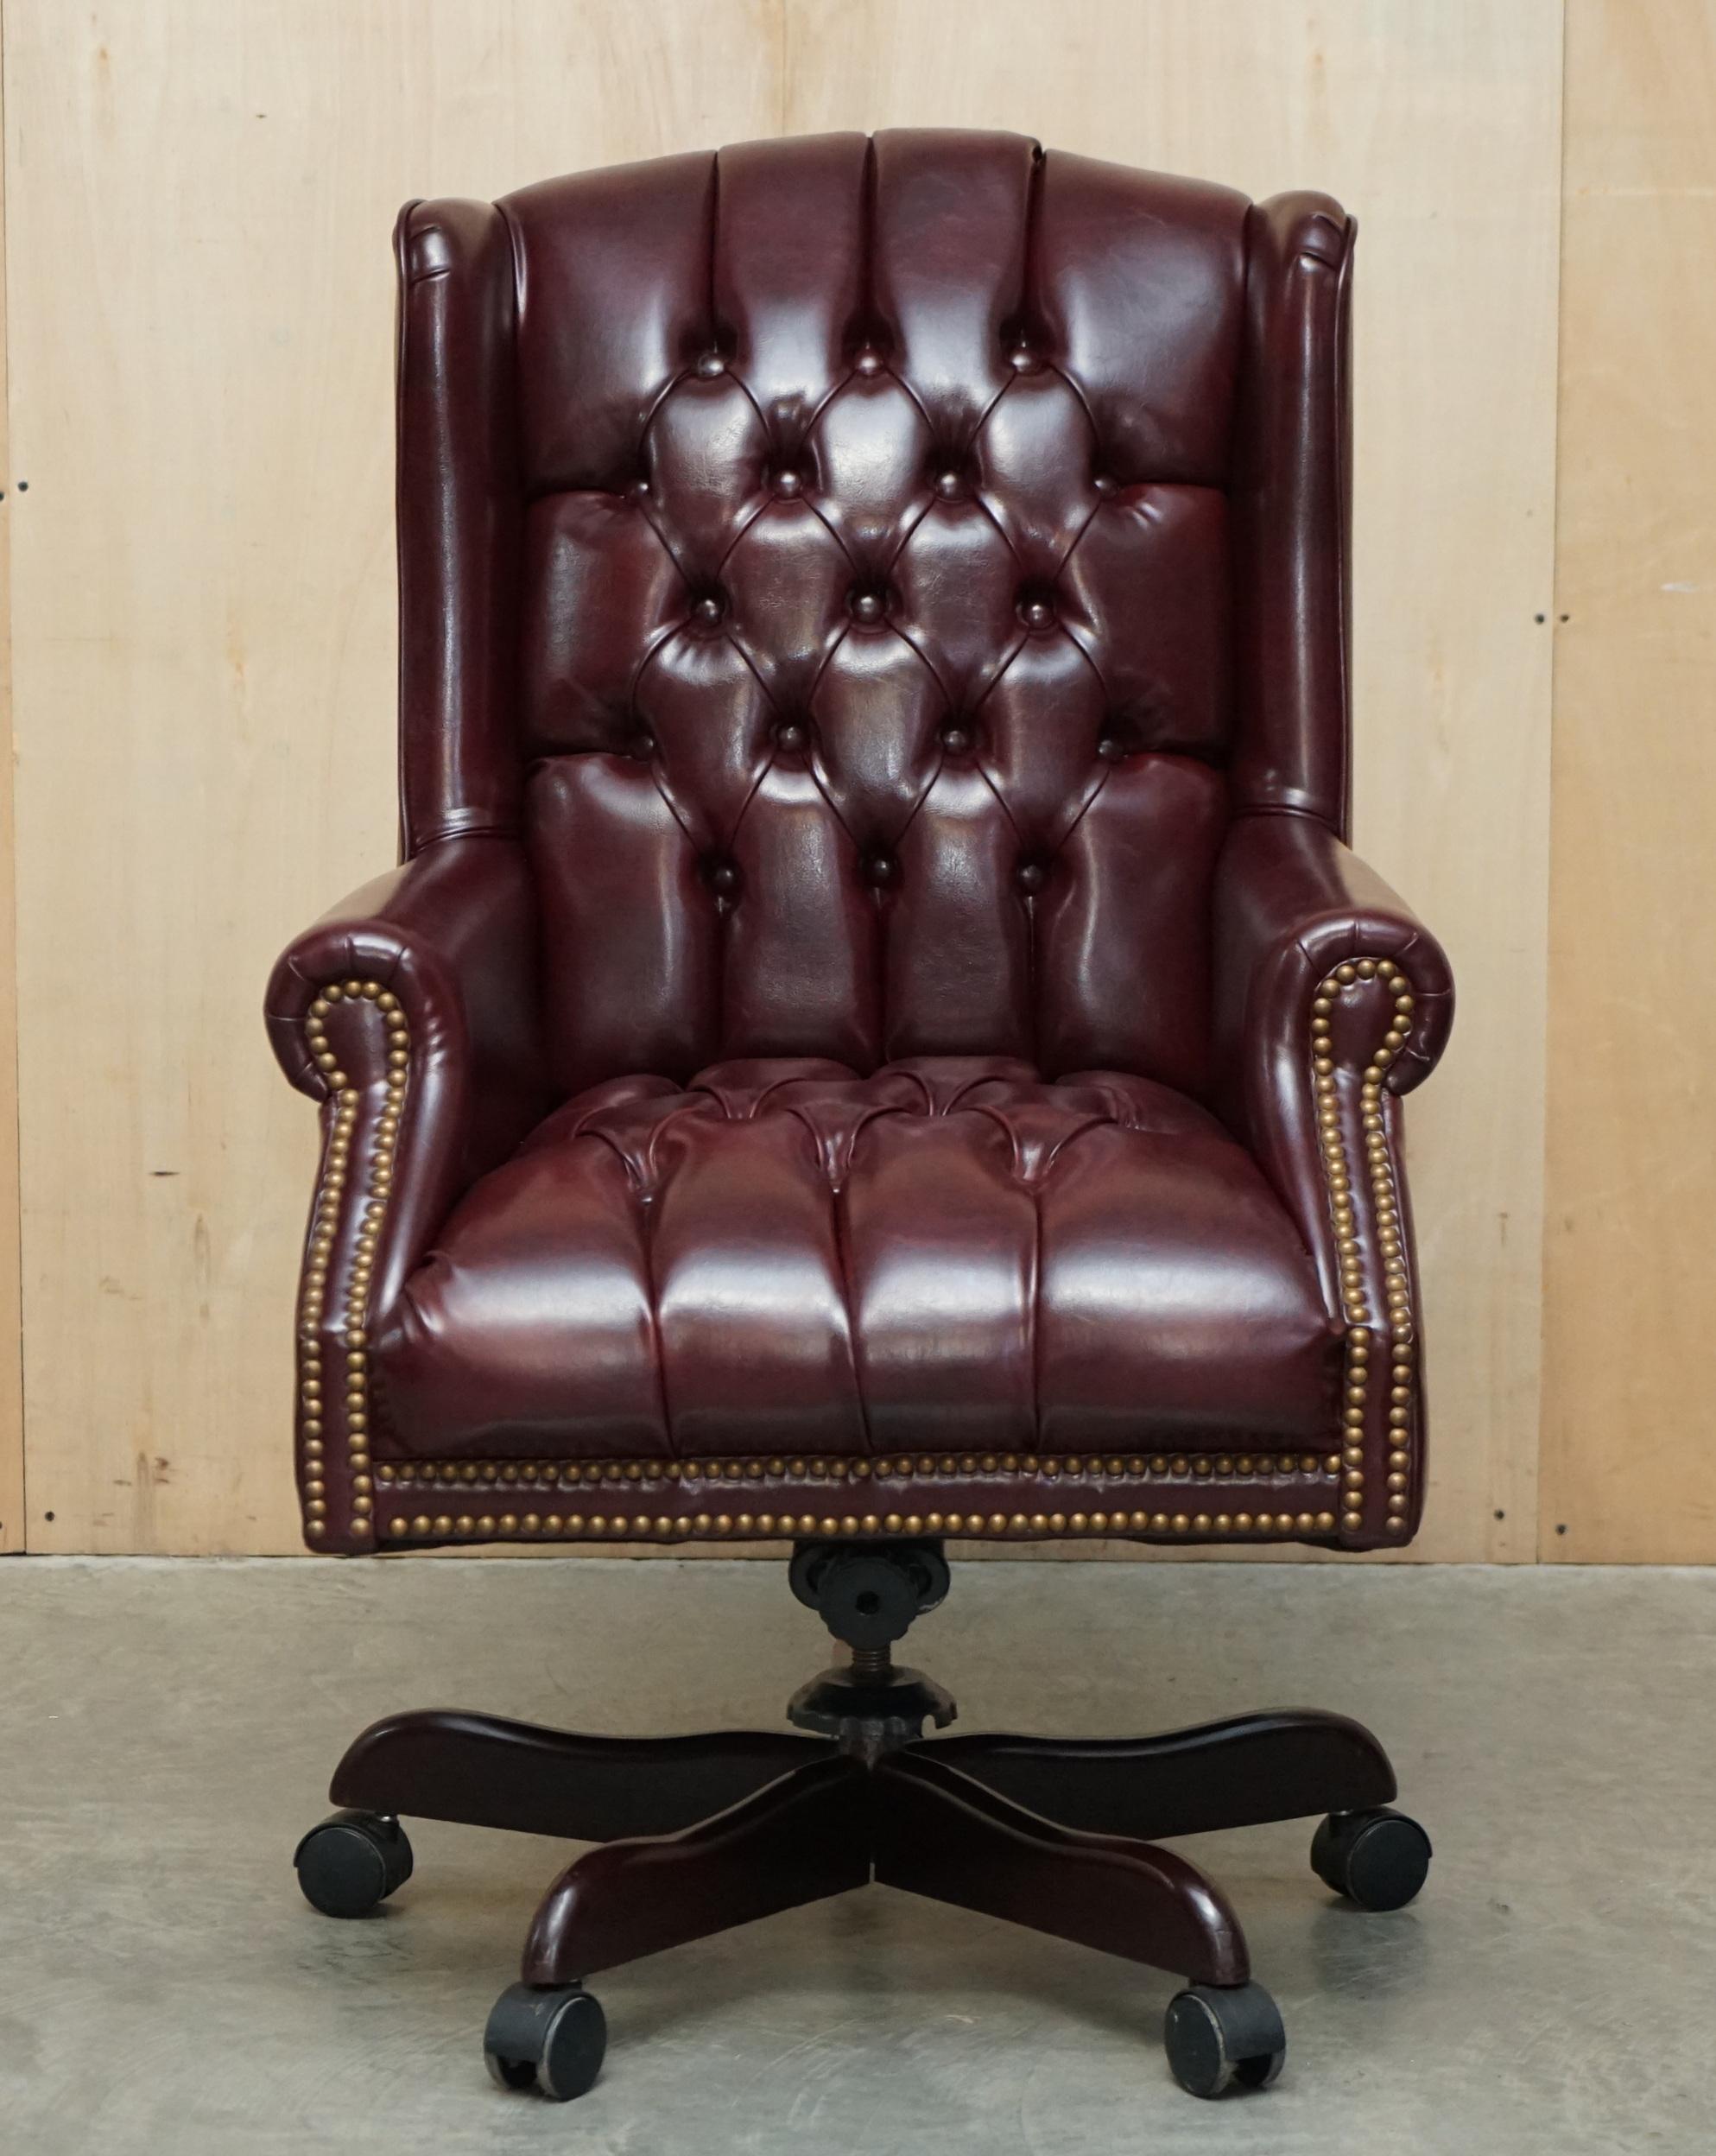 We are delighted to offer for sale this very comfortable Oxblood leather large Chesterfield Wingback office chair with original leather and patina.

This is a very comfortable captain’s indeed, it’s like your favourite reading chair with wheels.